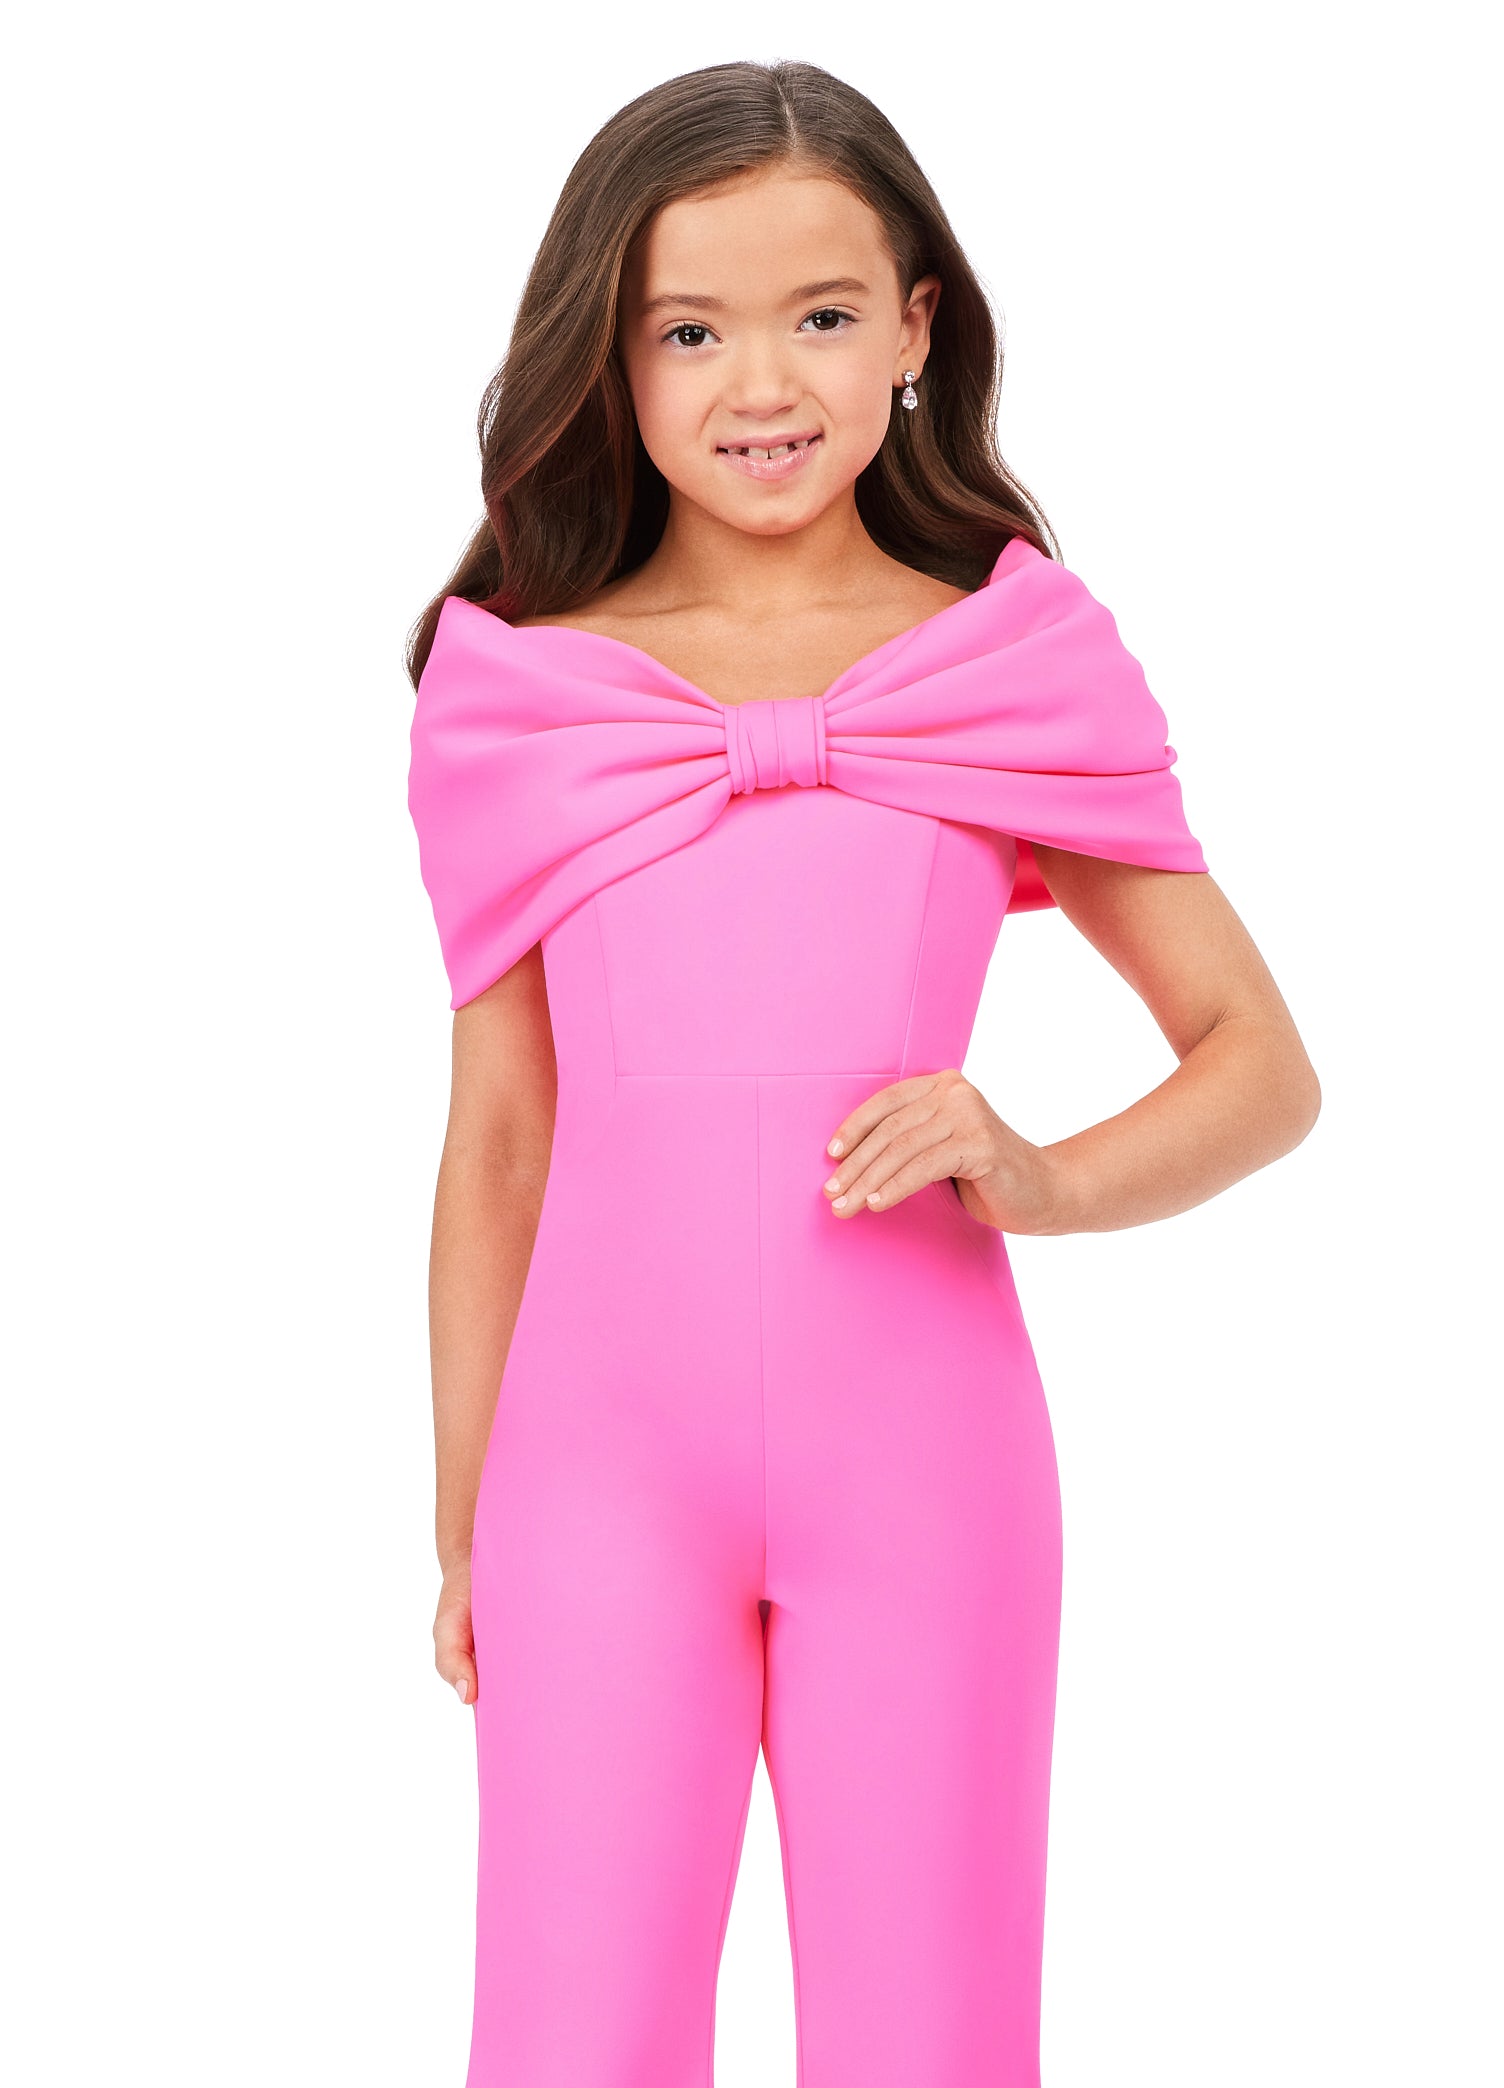 She'll be the talk of the town in the Ashley Lauren Kids 8227 Jumpsuit. Crafted from scuba material, this fashionable design features an off-shoulder bodice with an oversized bow and flare pant legs for a modern touch. Perfect for any special occasion.  Sizes: 4-16  Colors: Red, Hot Pink, Turquoise, White/Black